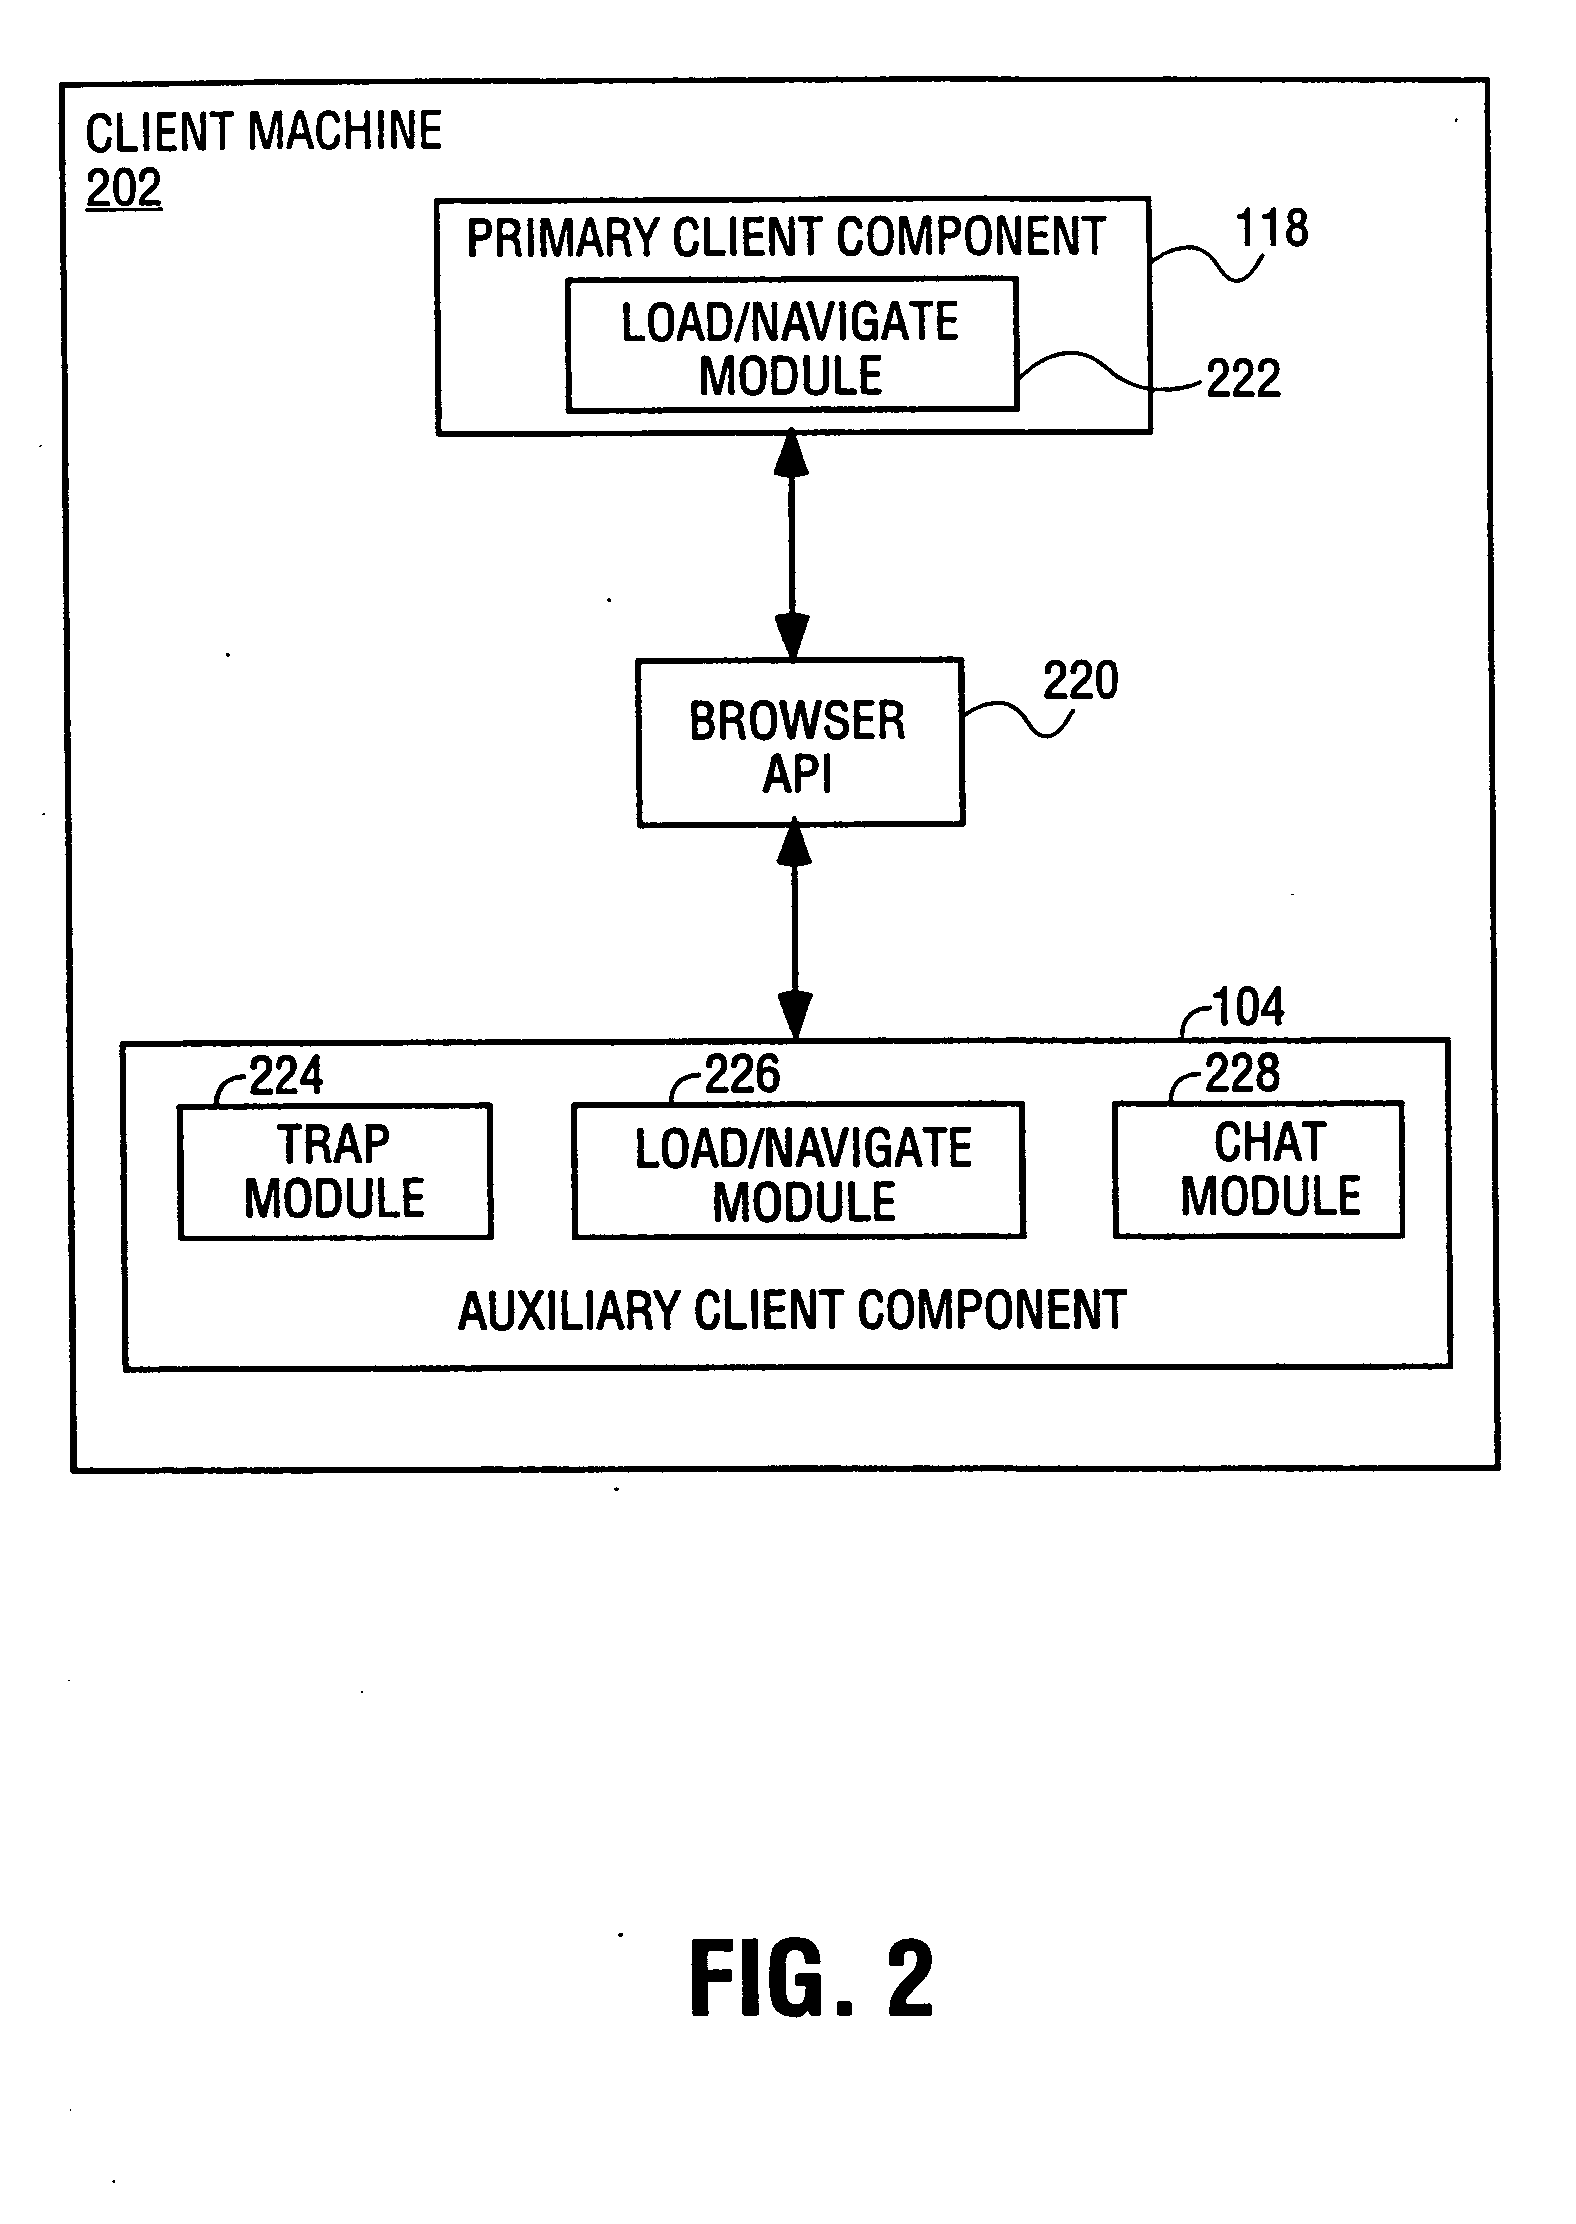 Network-based interaction and review service for facilitating communication in a network-based commerce environment